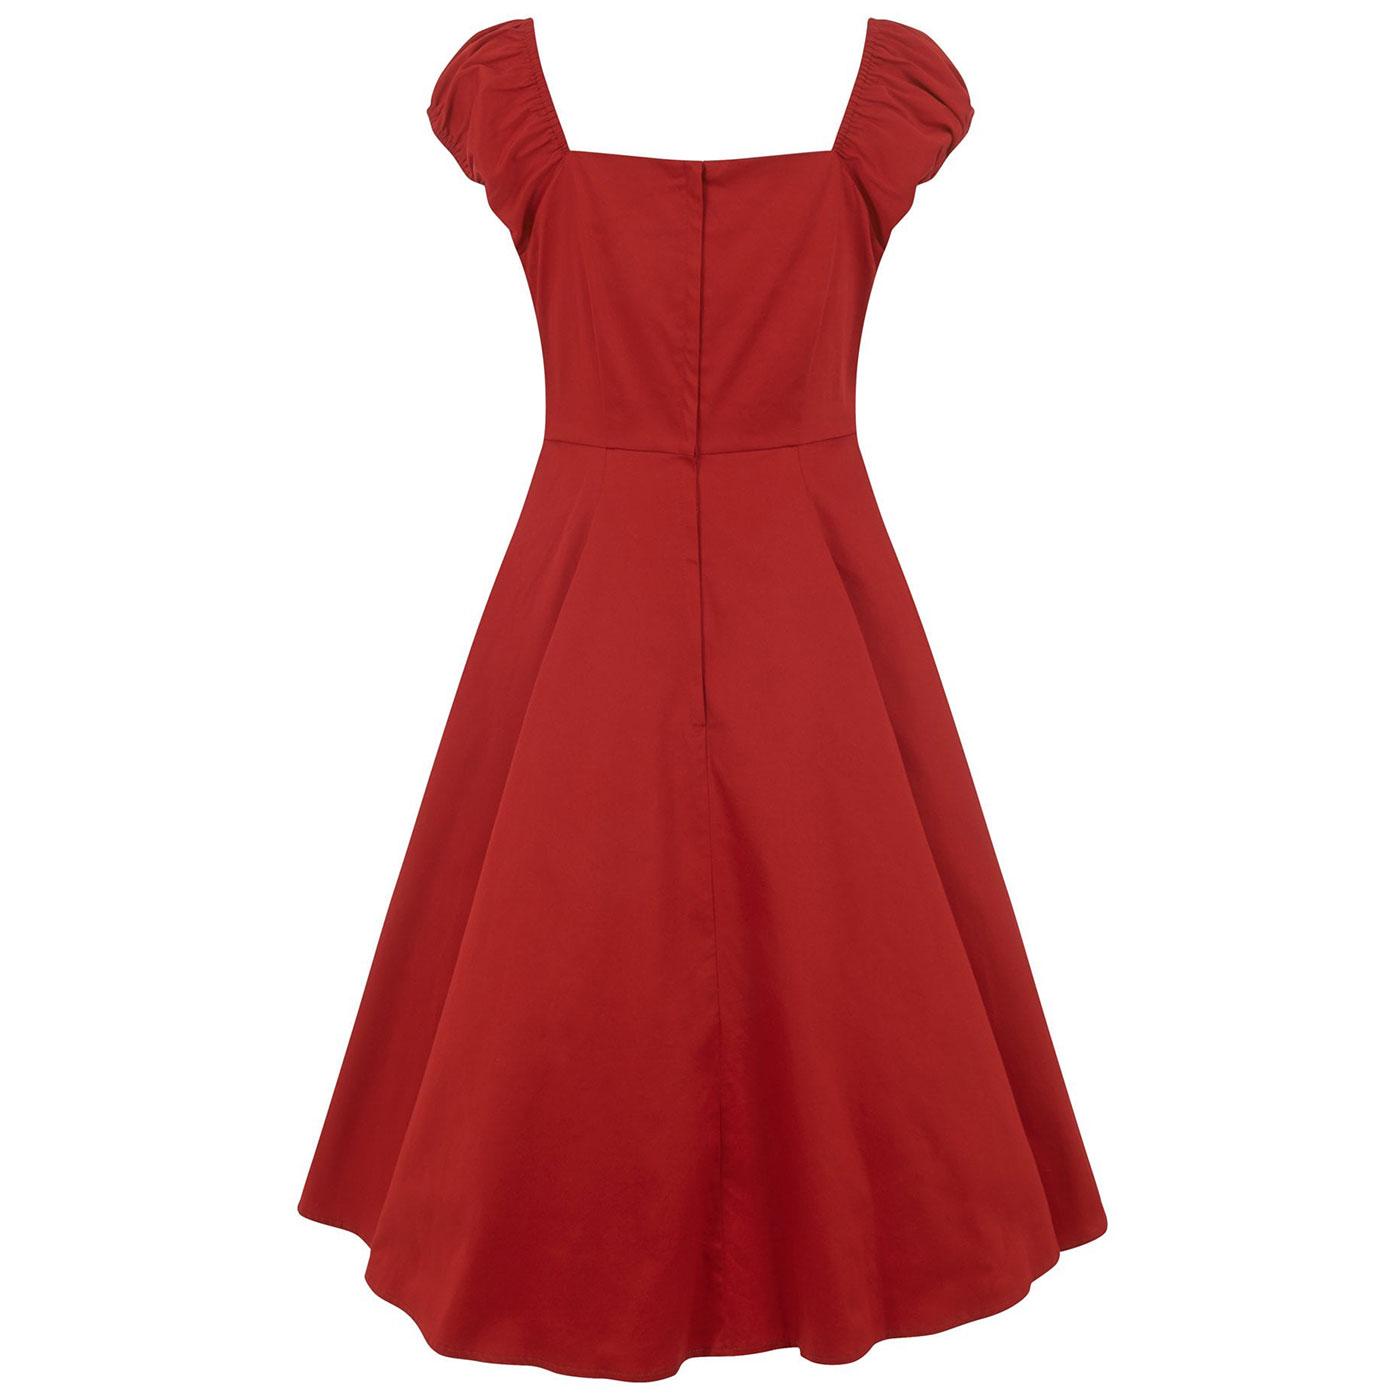 COLLECTIF Dolores Retro 1950s Vintage Doll Dress in Red